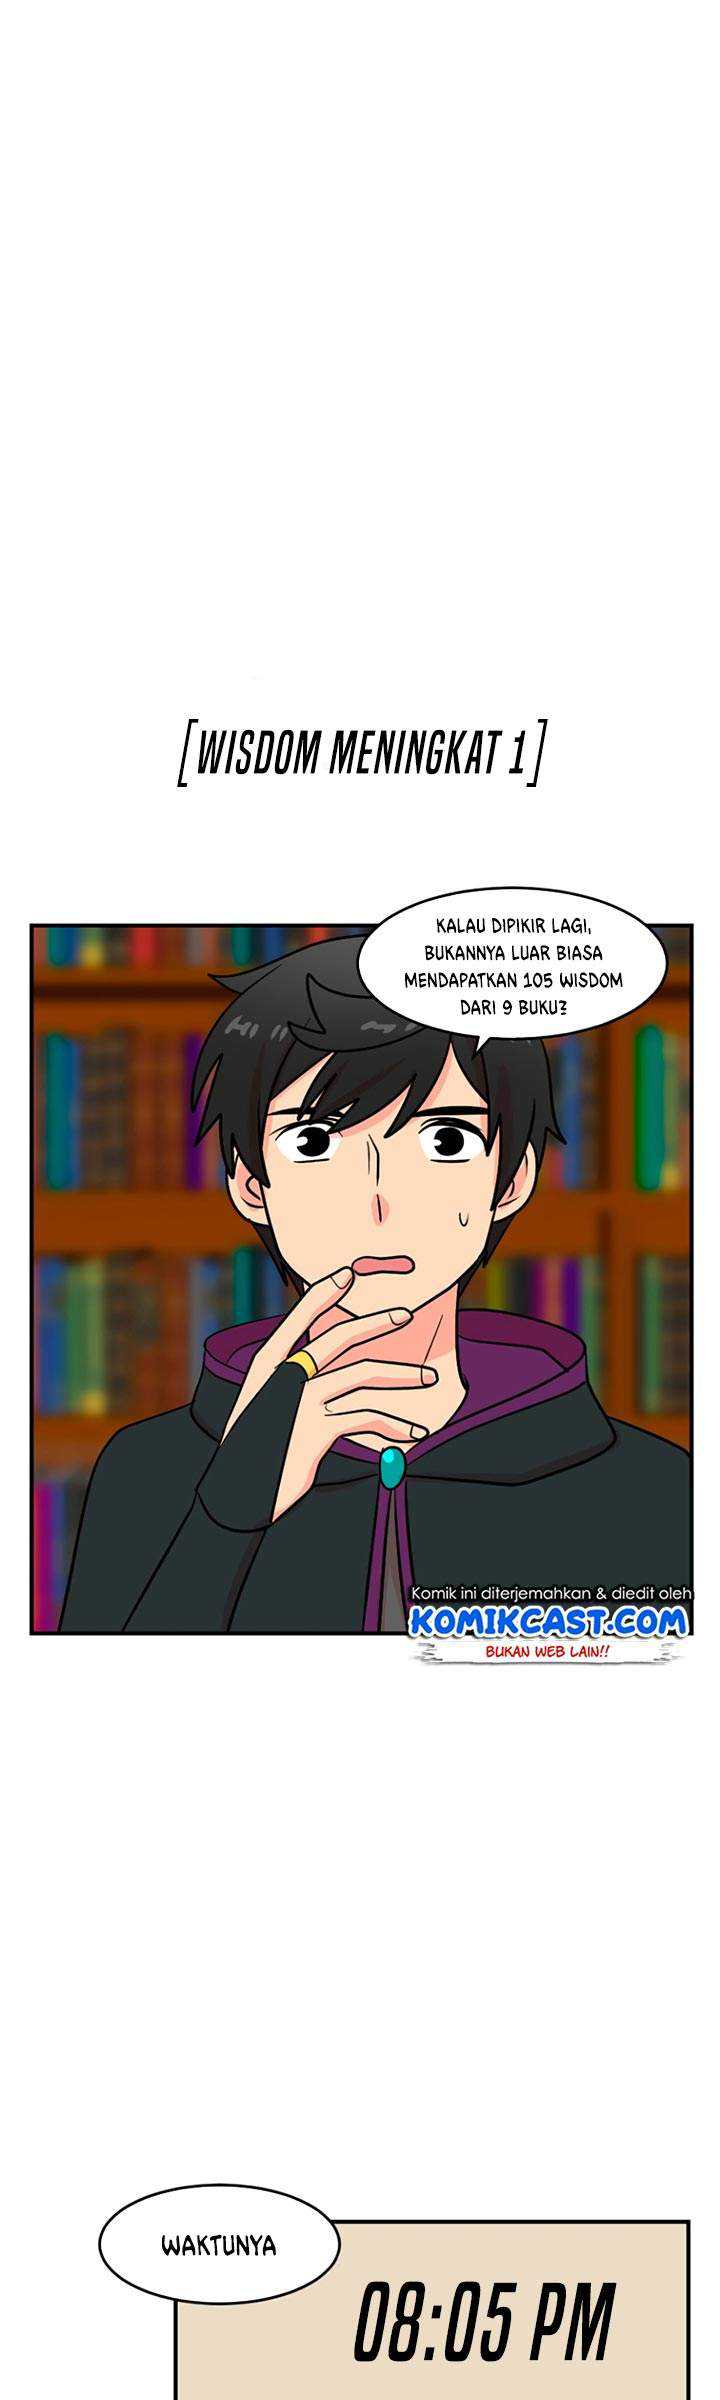 Bookworm Chapter 68